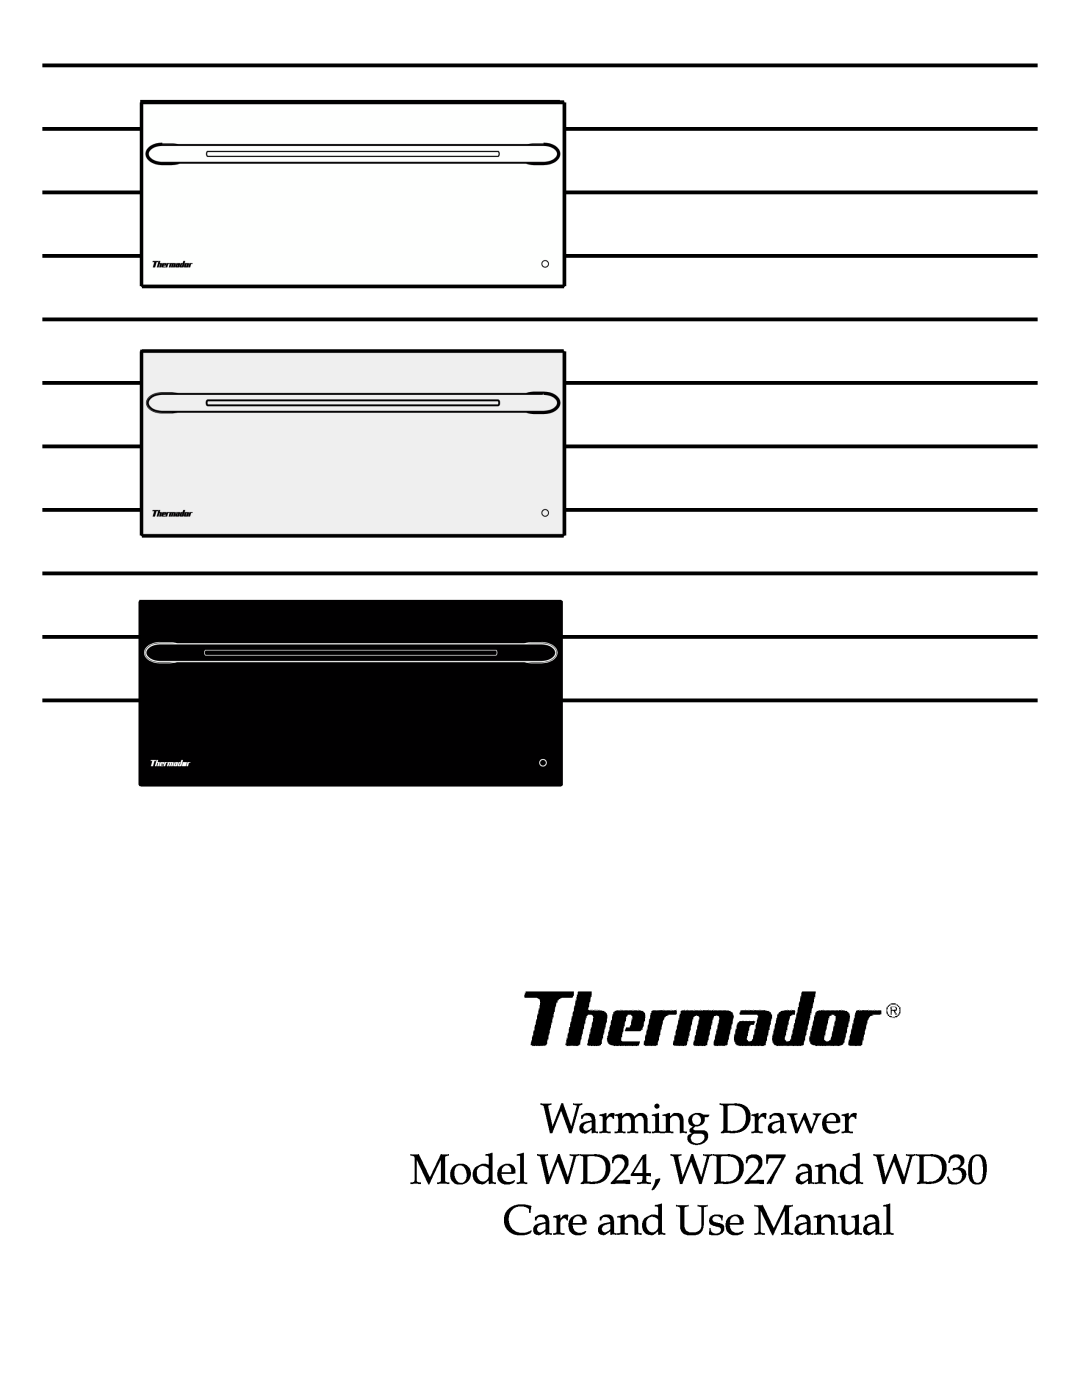 Thermador WD27, WD30 manual Warming Drawer Model WD24, WD27 and WD30 Care and Use Manual 